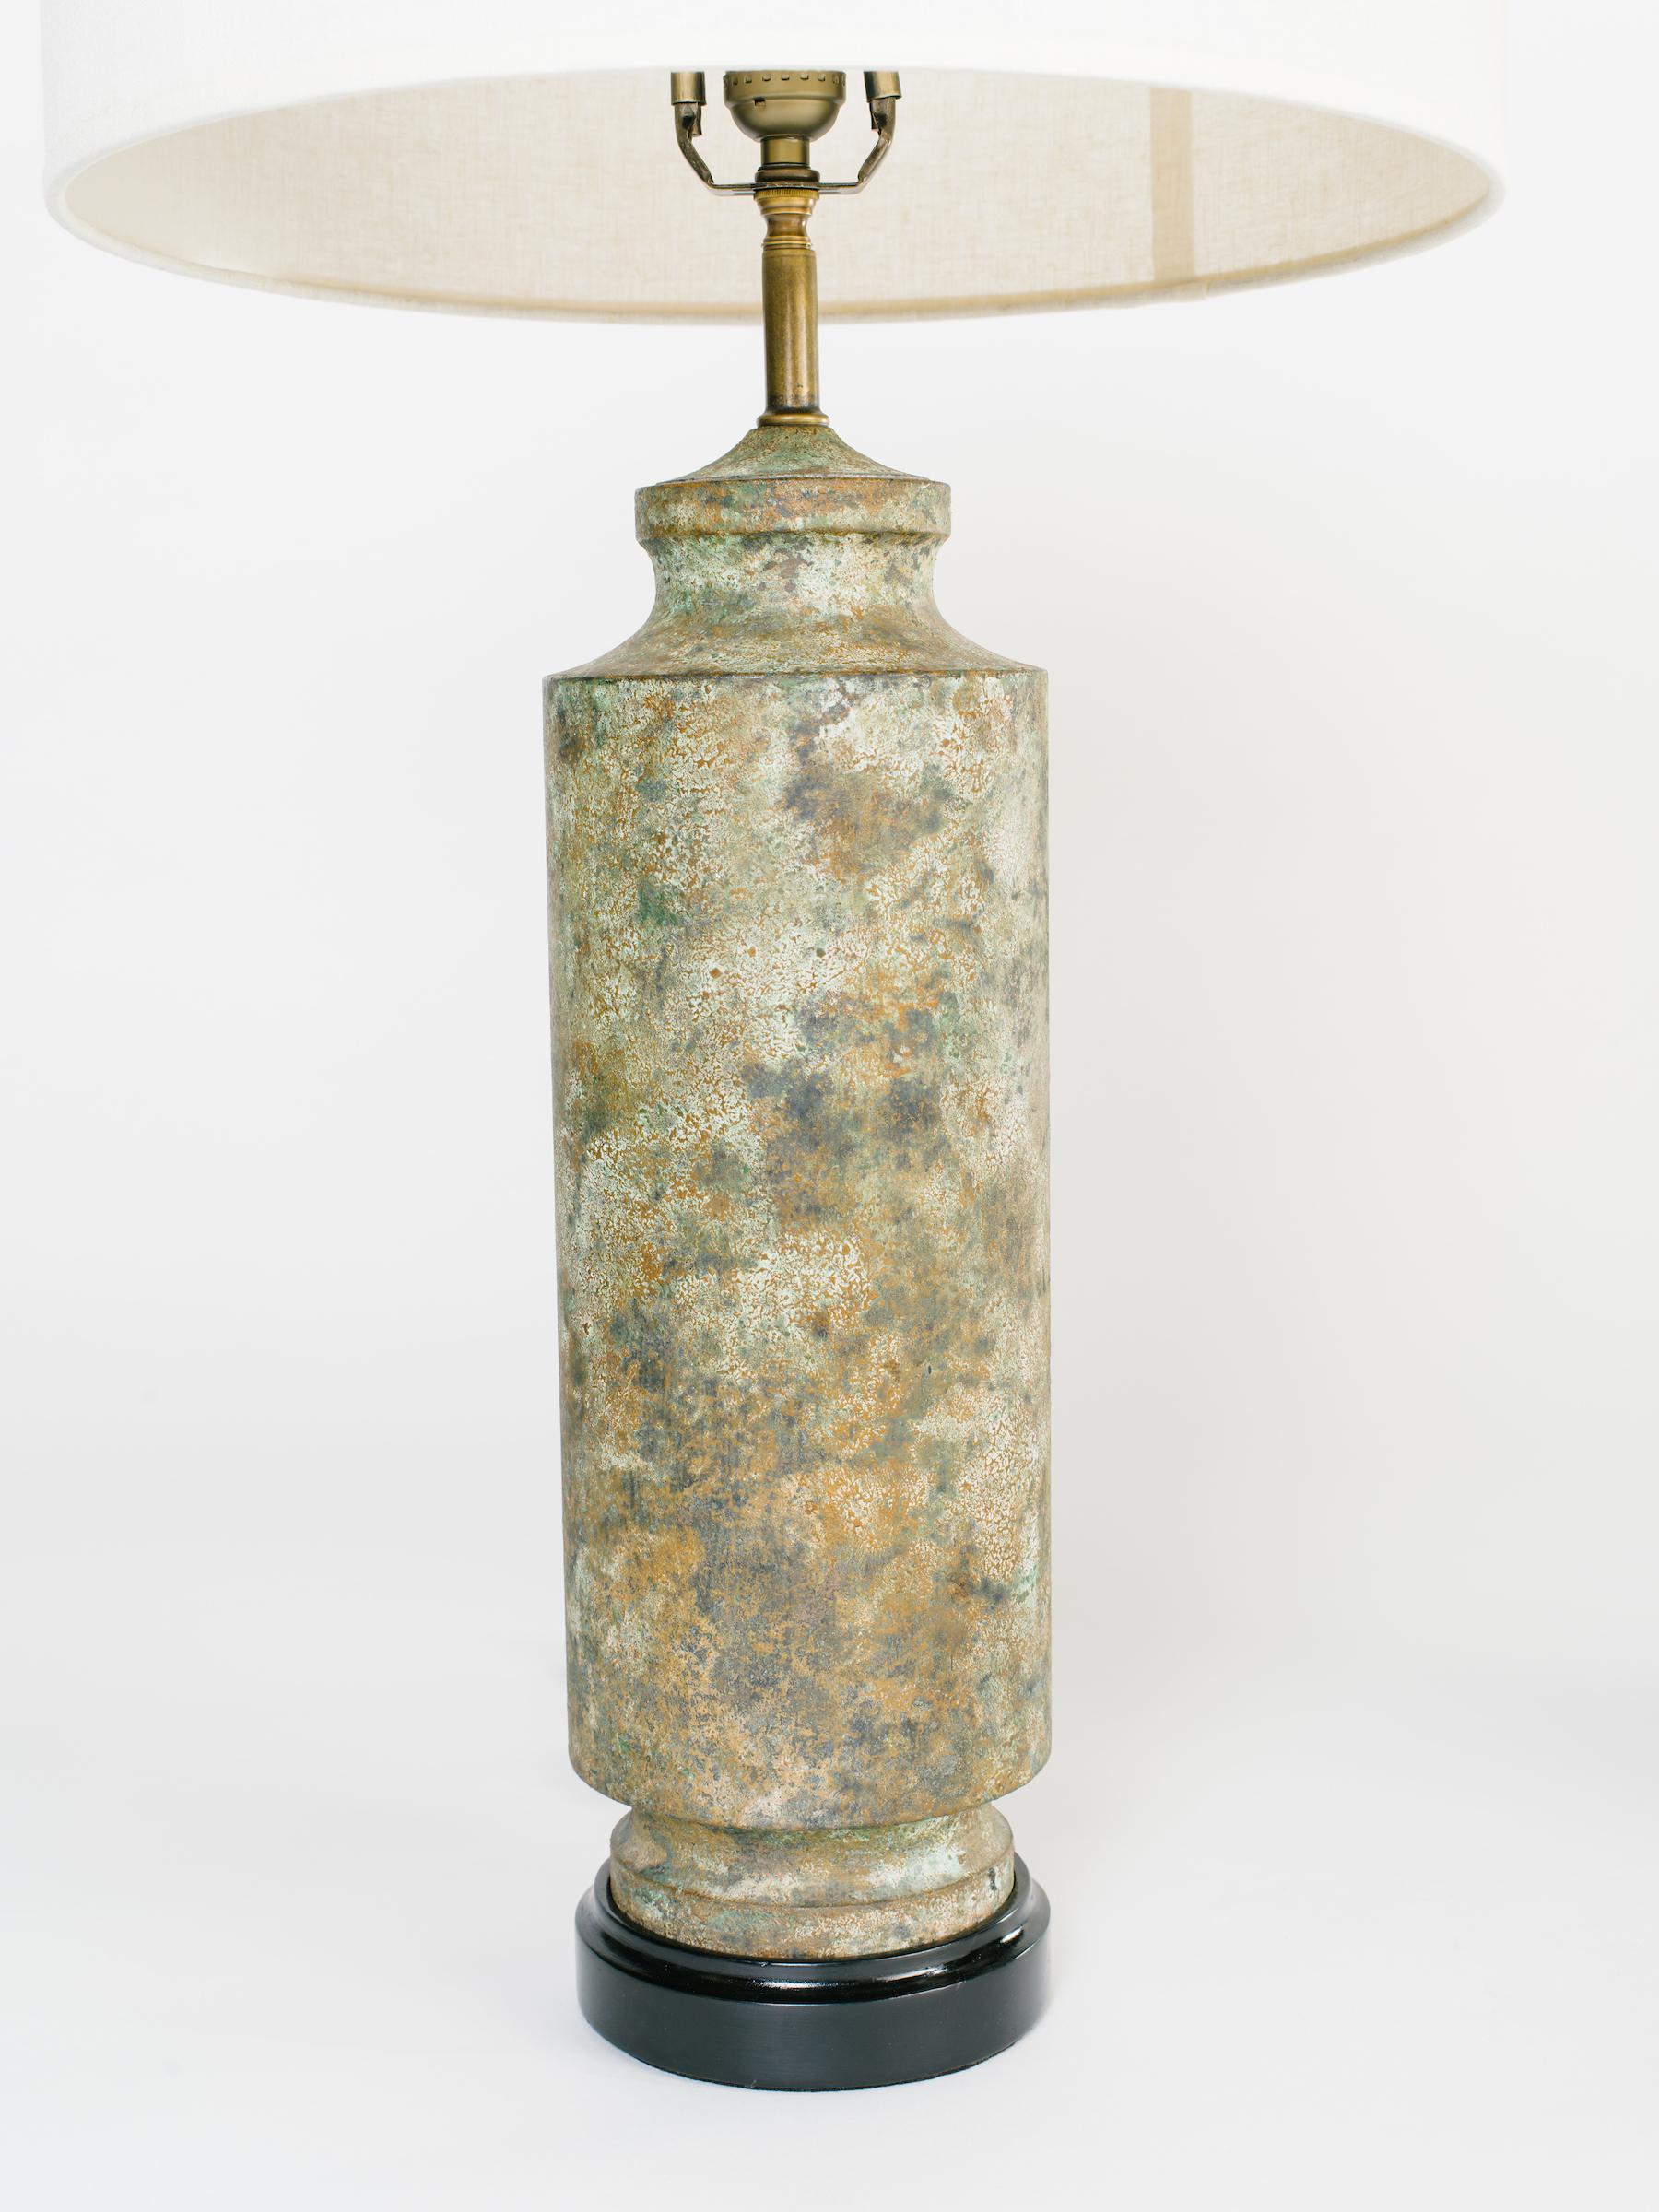 Cast Pair of Mid-Century Modern Pagoda Lamps in Distressed Verdigris Metal, 1960's For Sale